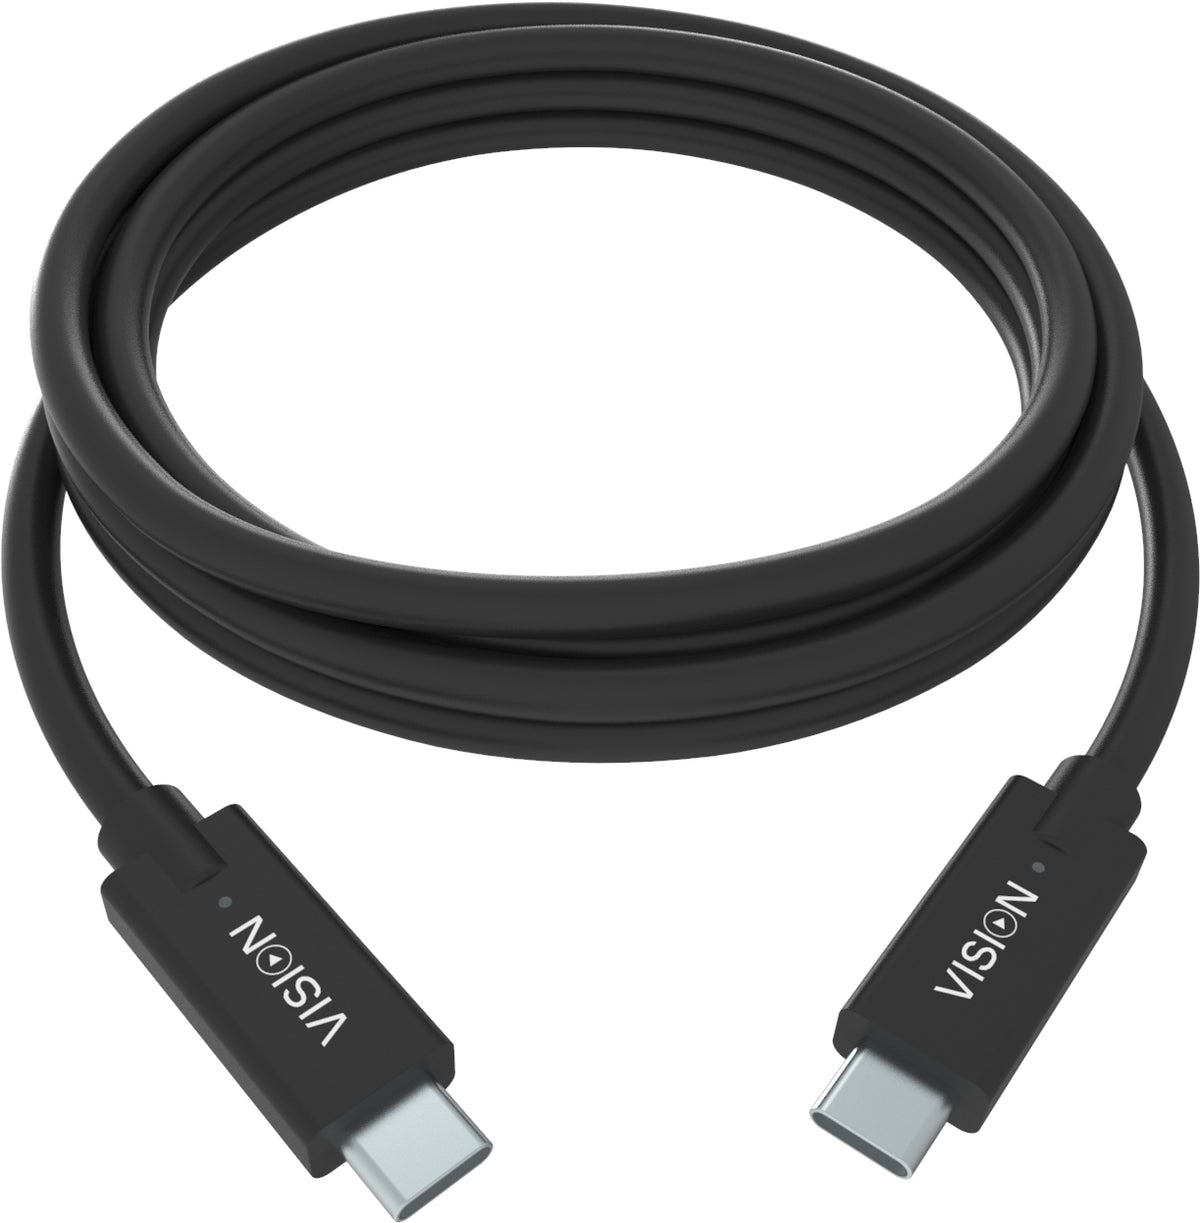 VISION Professional installation-grade USB-C cable - LIFETIME WARRANTY - bandwidth up to 10 gbit/s - supports 3A charging current - USB-C 3.1 (M) to USB-C 3.1 (M) - outer diameter 4.5 mm - 22+30 AWG - 1 m - black